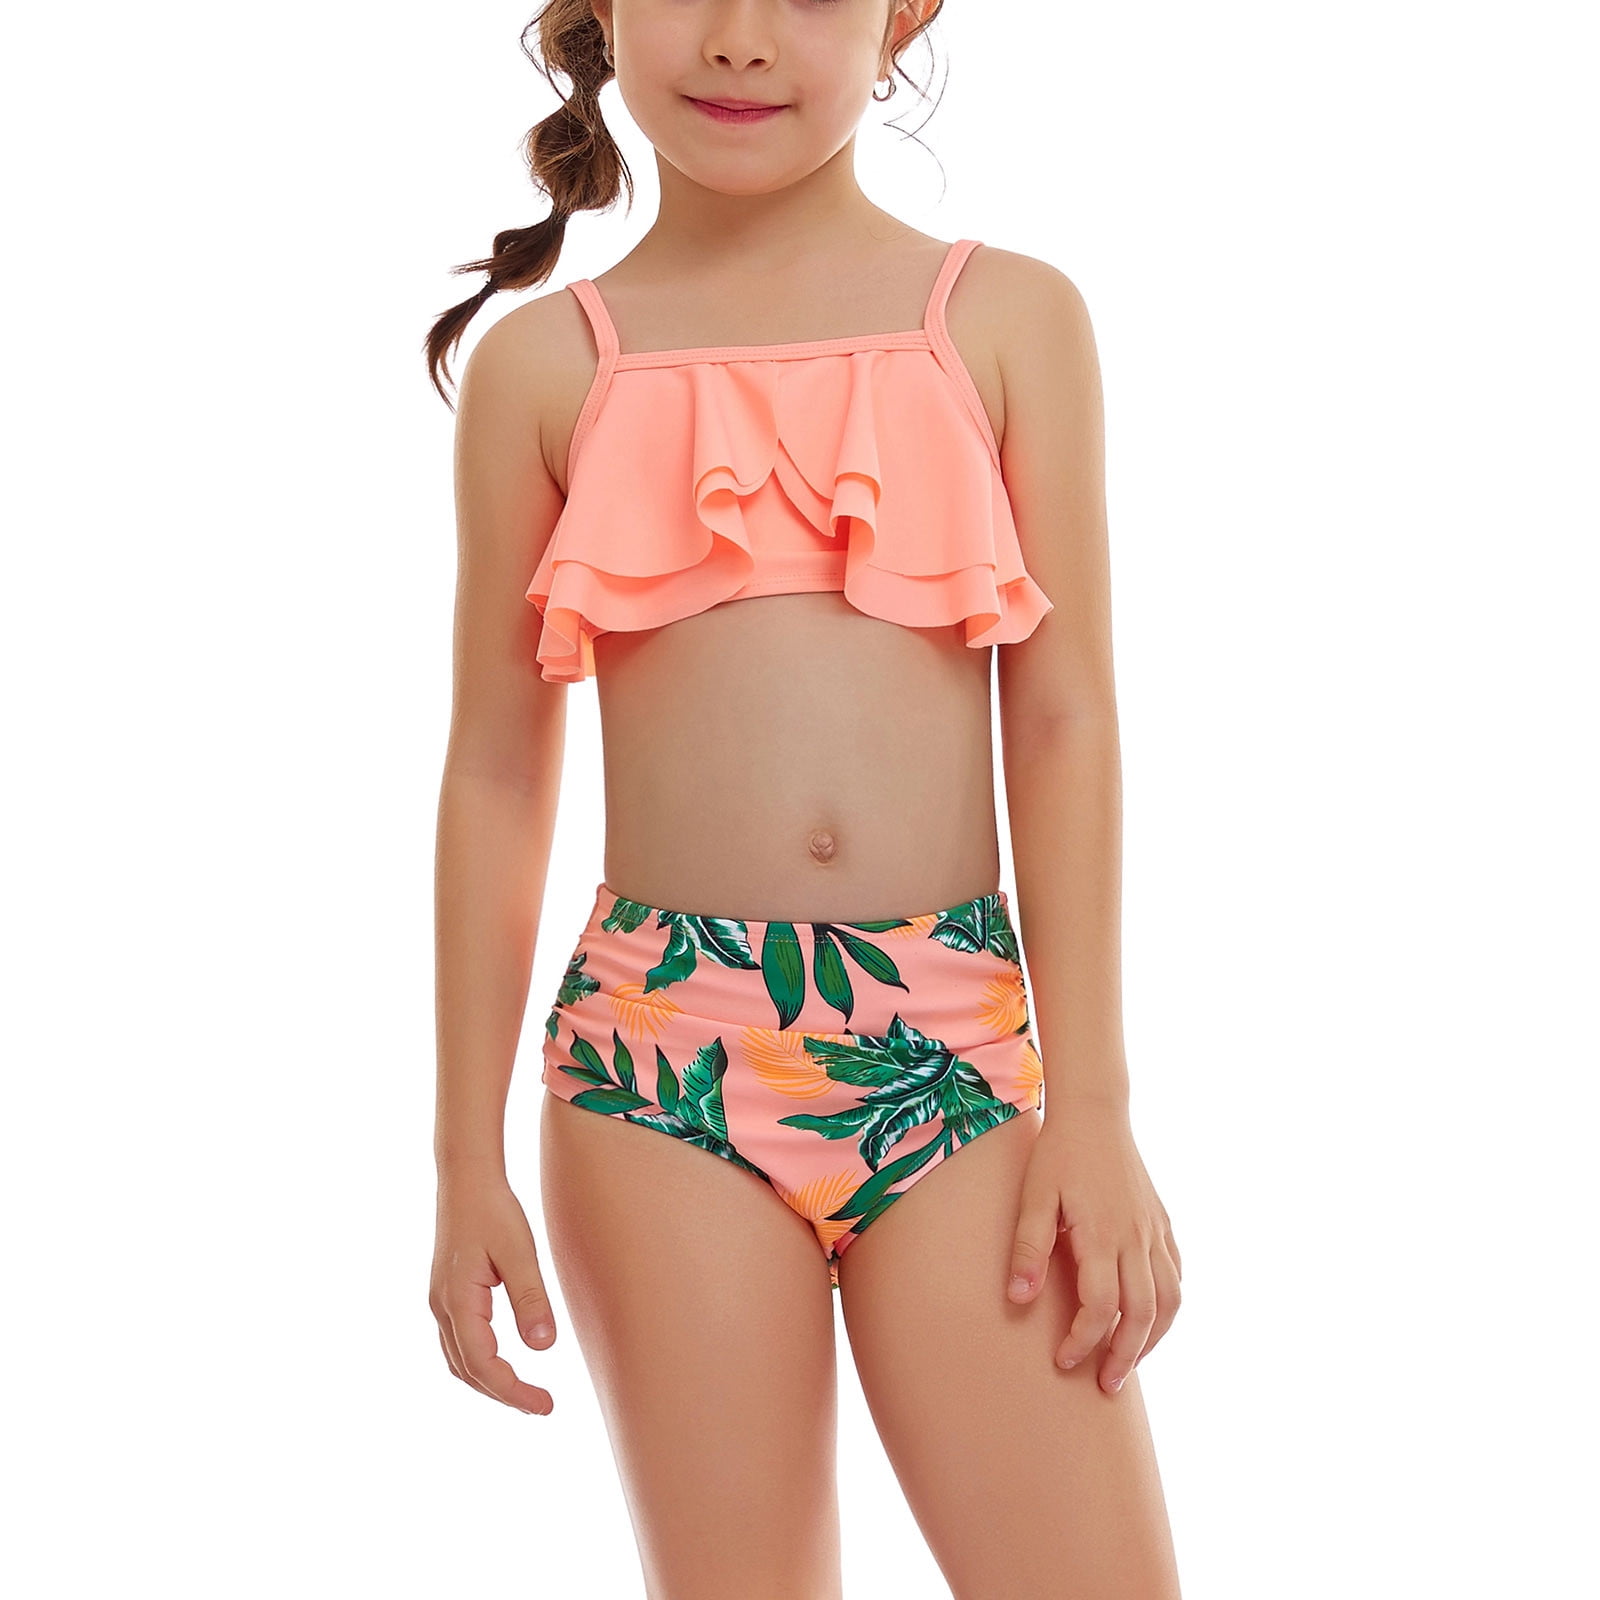 Fesfesfes Girls Summer Swimsuits Casual Cute Floral Print Double